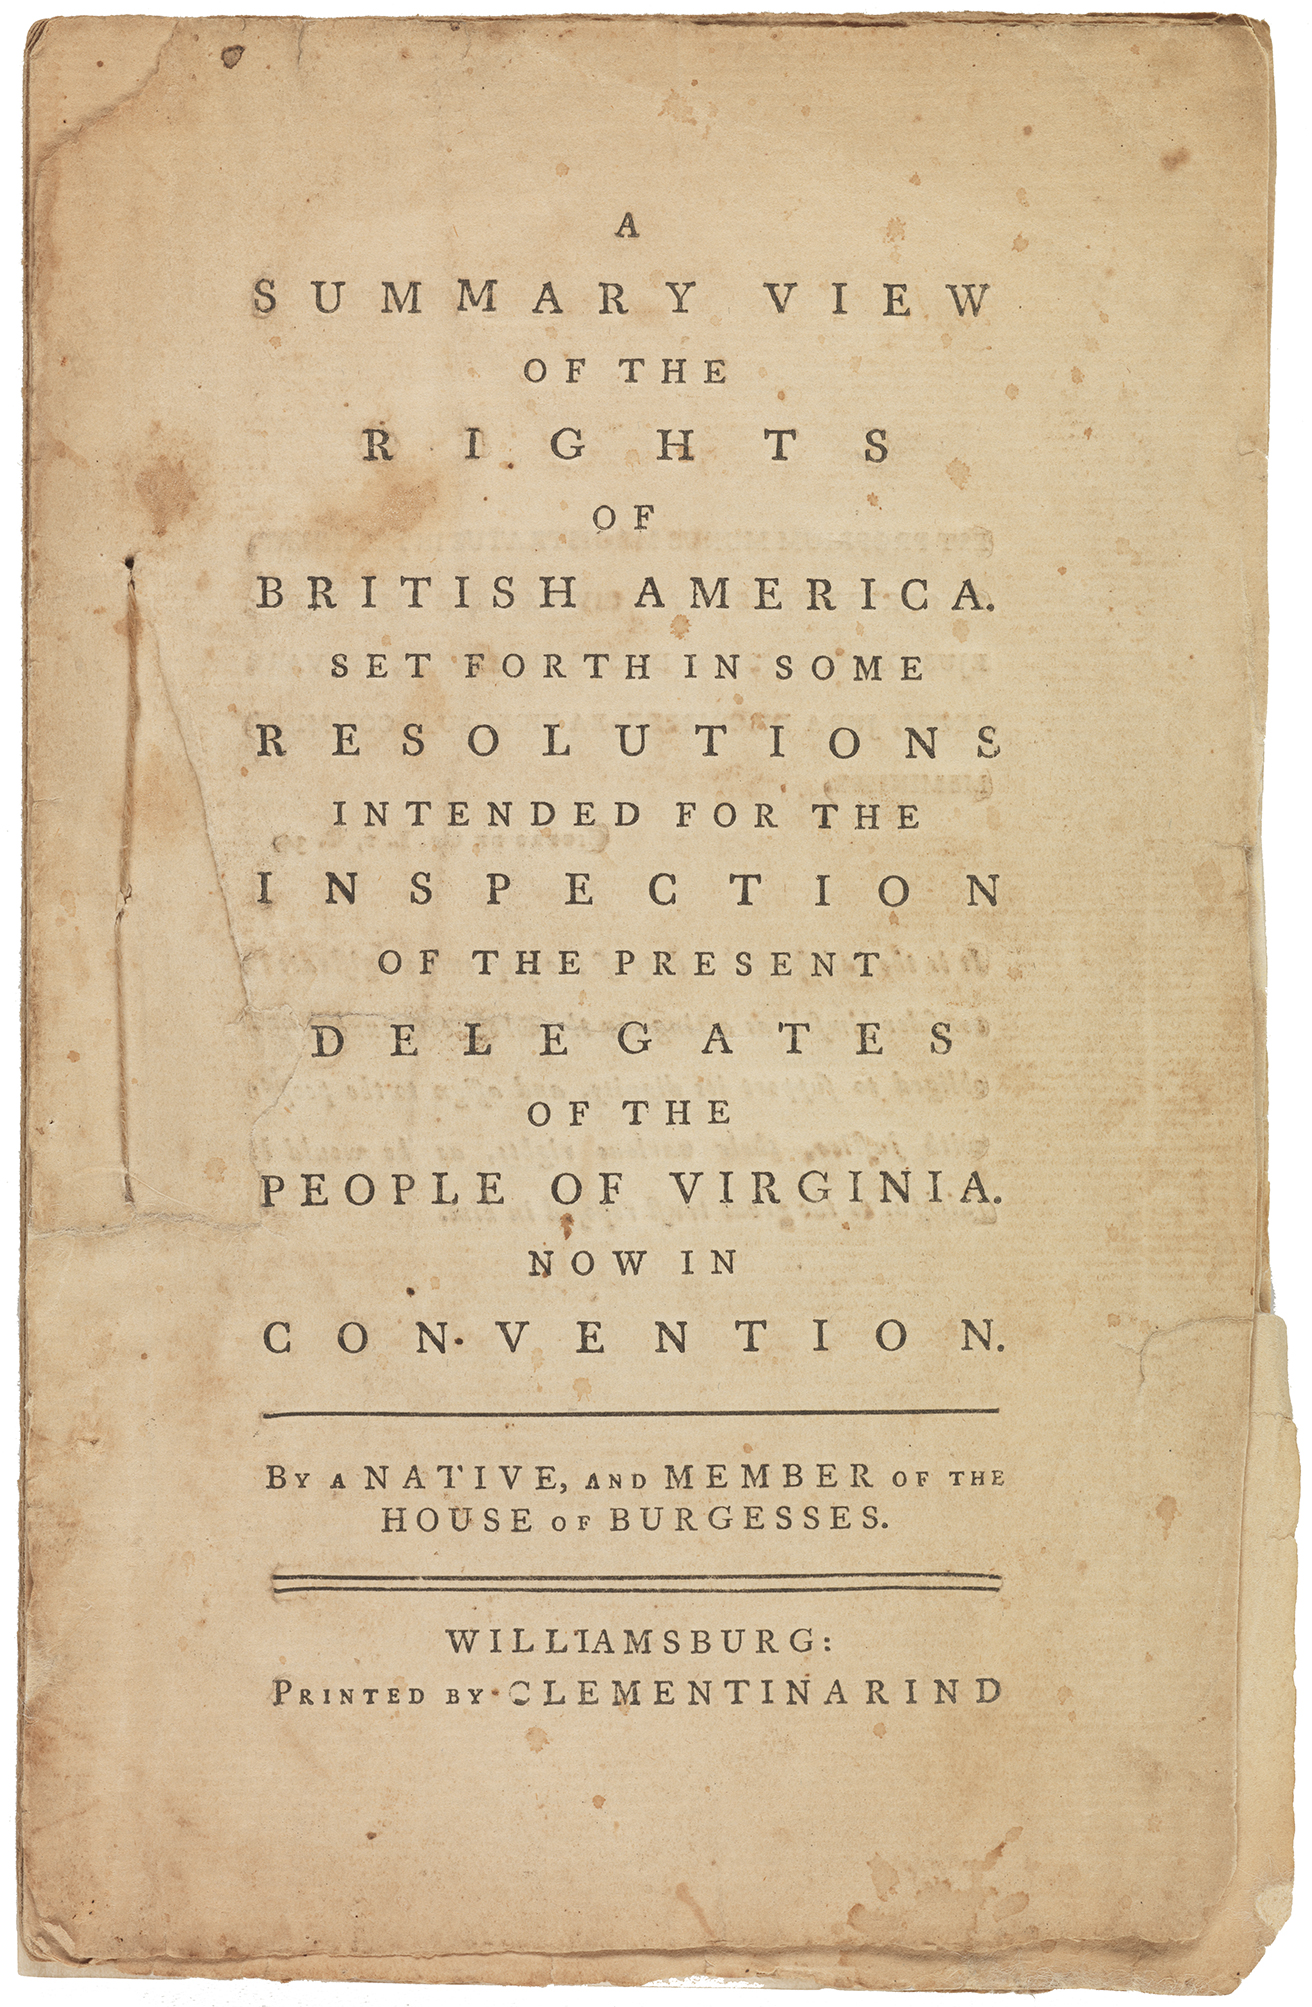 Thomas Jefferson's A Summary View of the Rights of British America